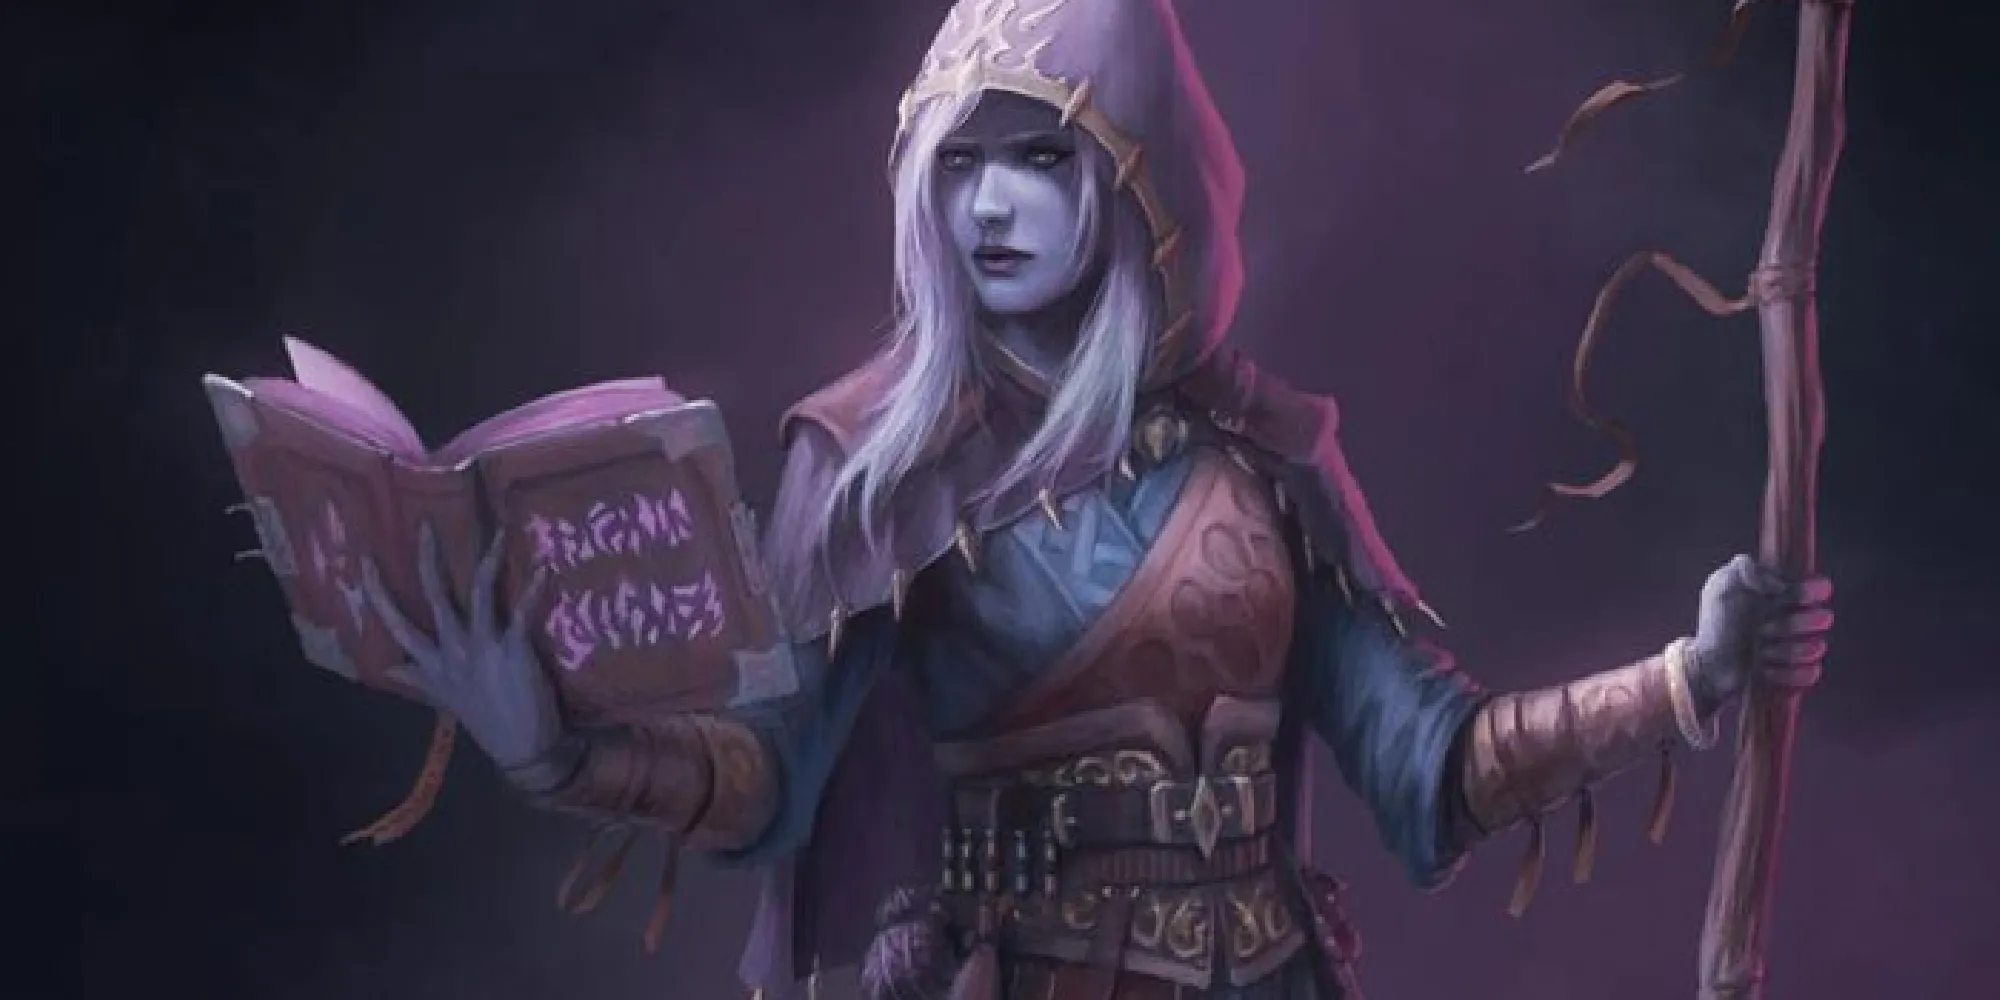 A spellcaster looking into their spellbook, the cover glowing with purple runes.